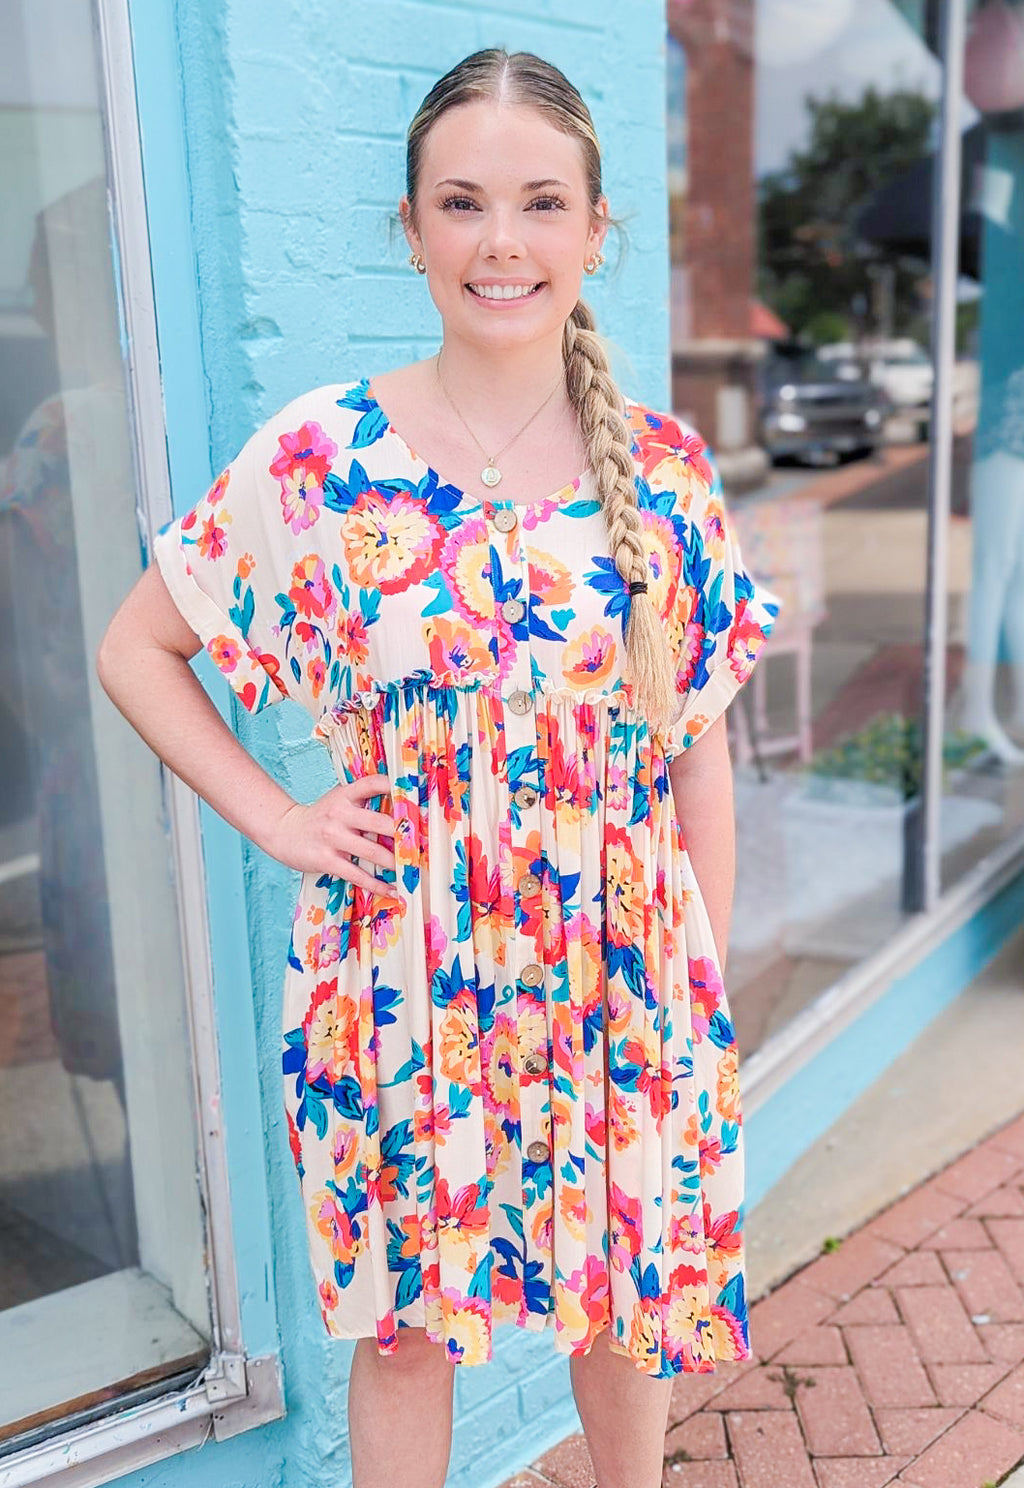 Summer Blooms Colorful Floral Dress